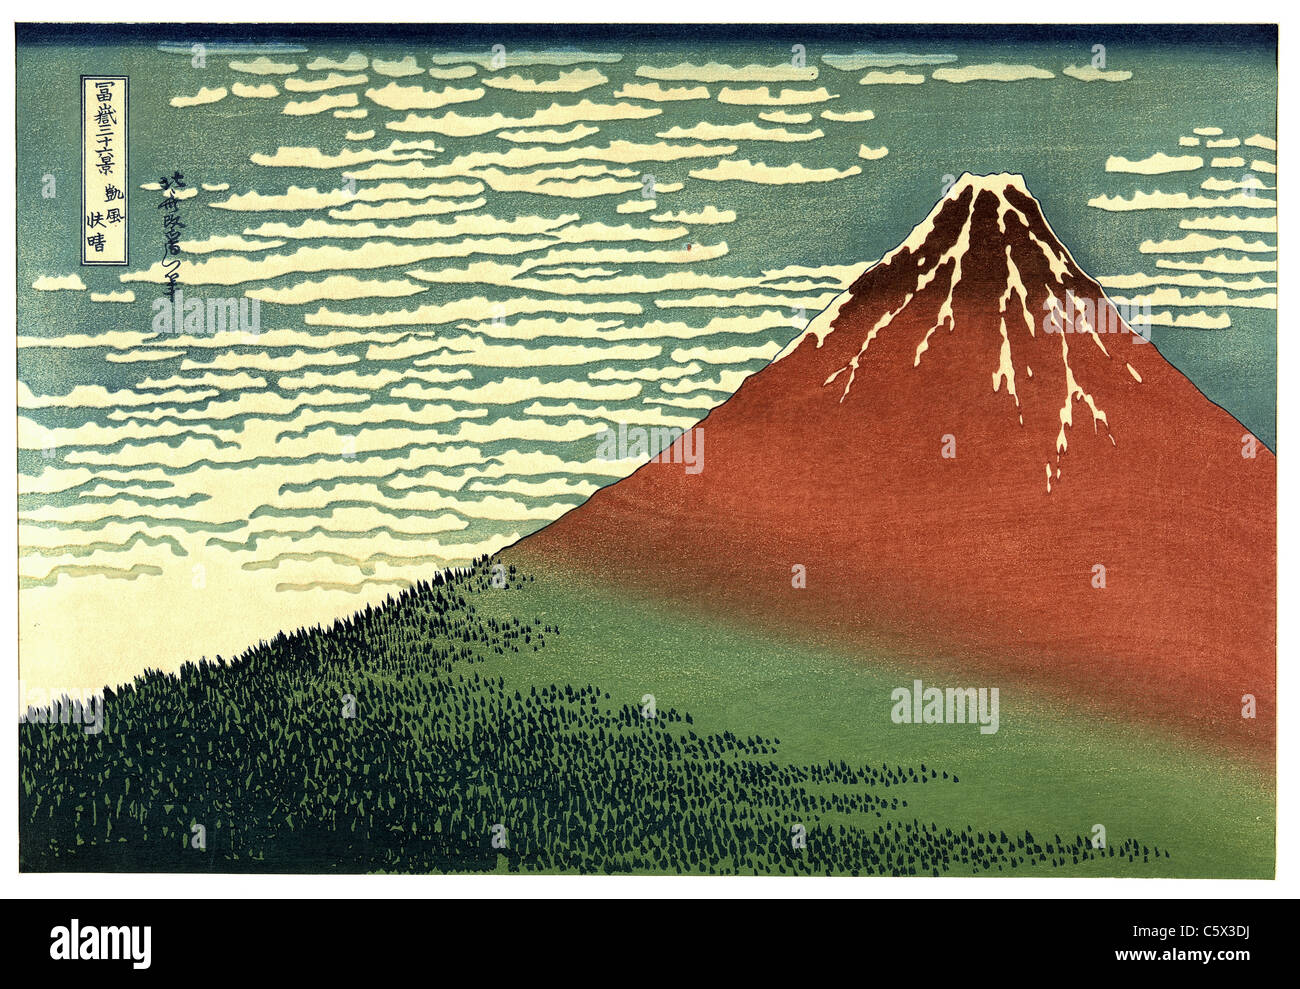 South Wind, Clear Sky (Fine Wind, Clear Morning, or Red Fuji) by Katsushika Hokusai - Very high quality and resolution image Stock Photo